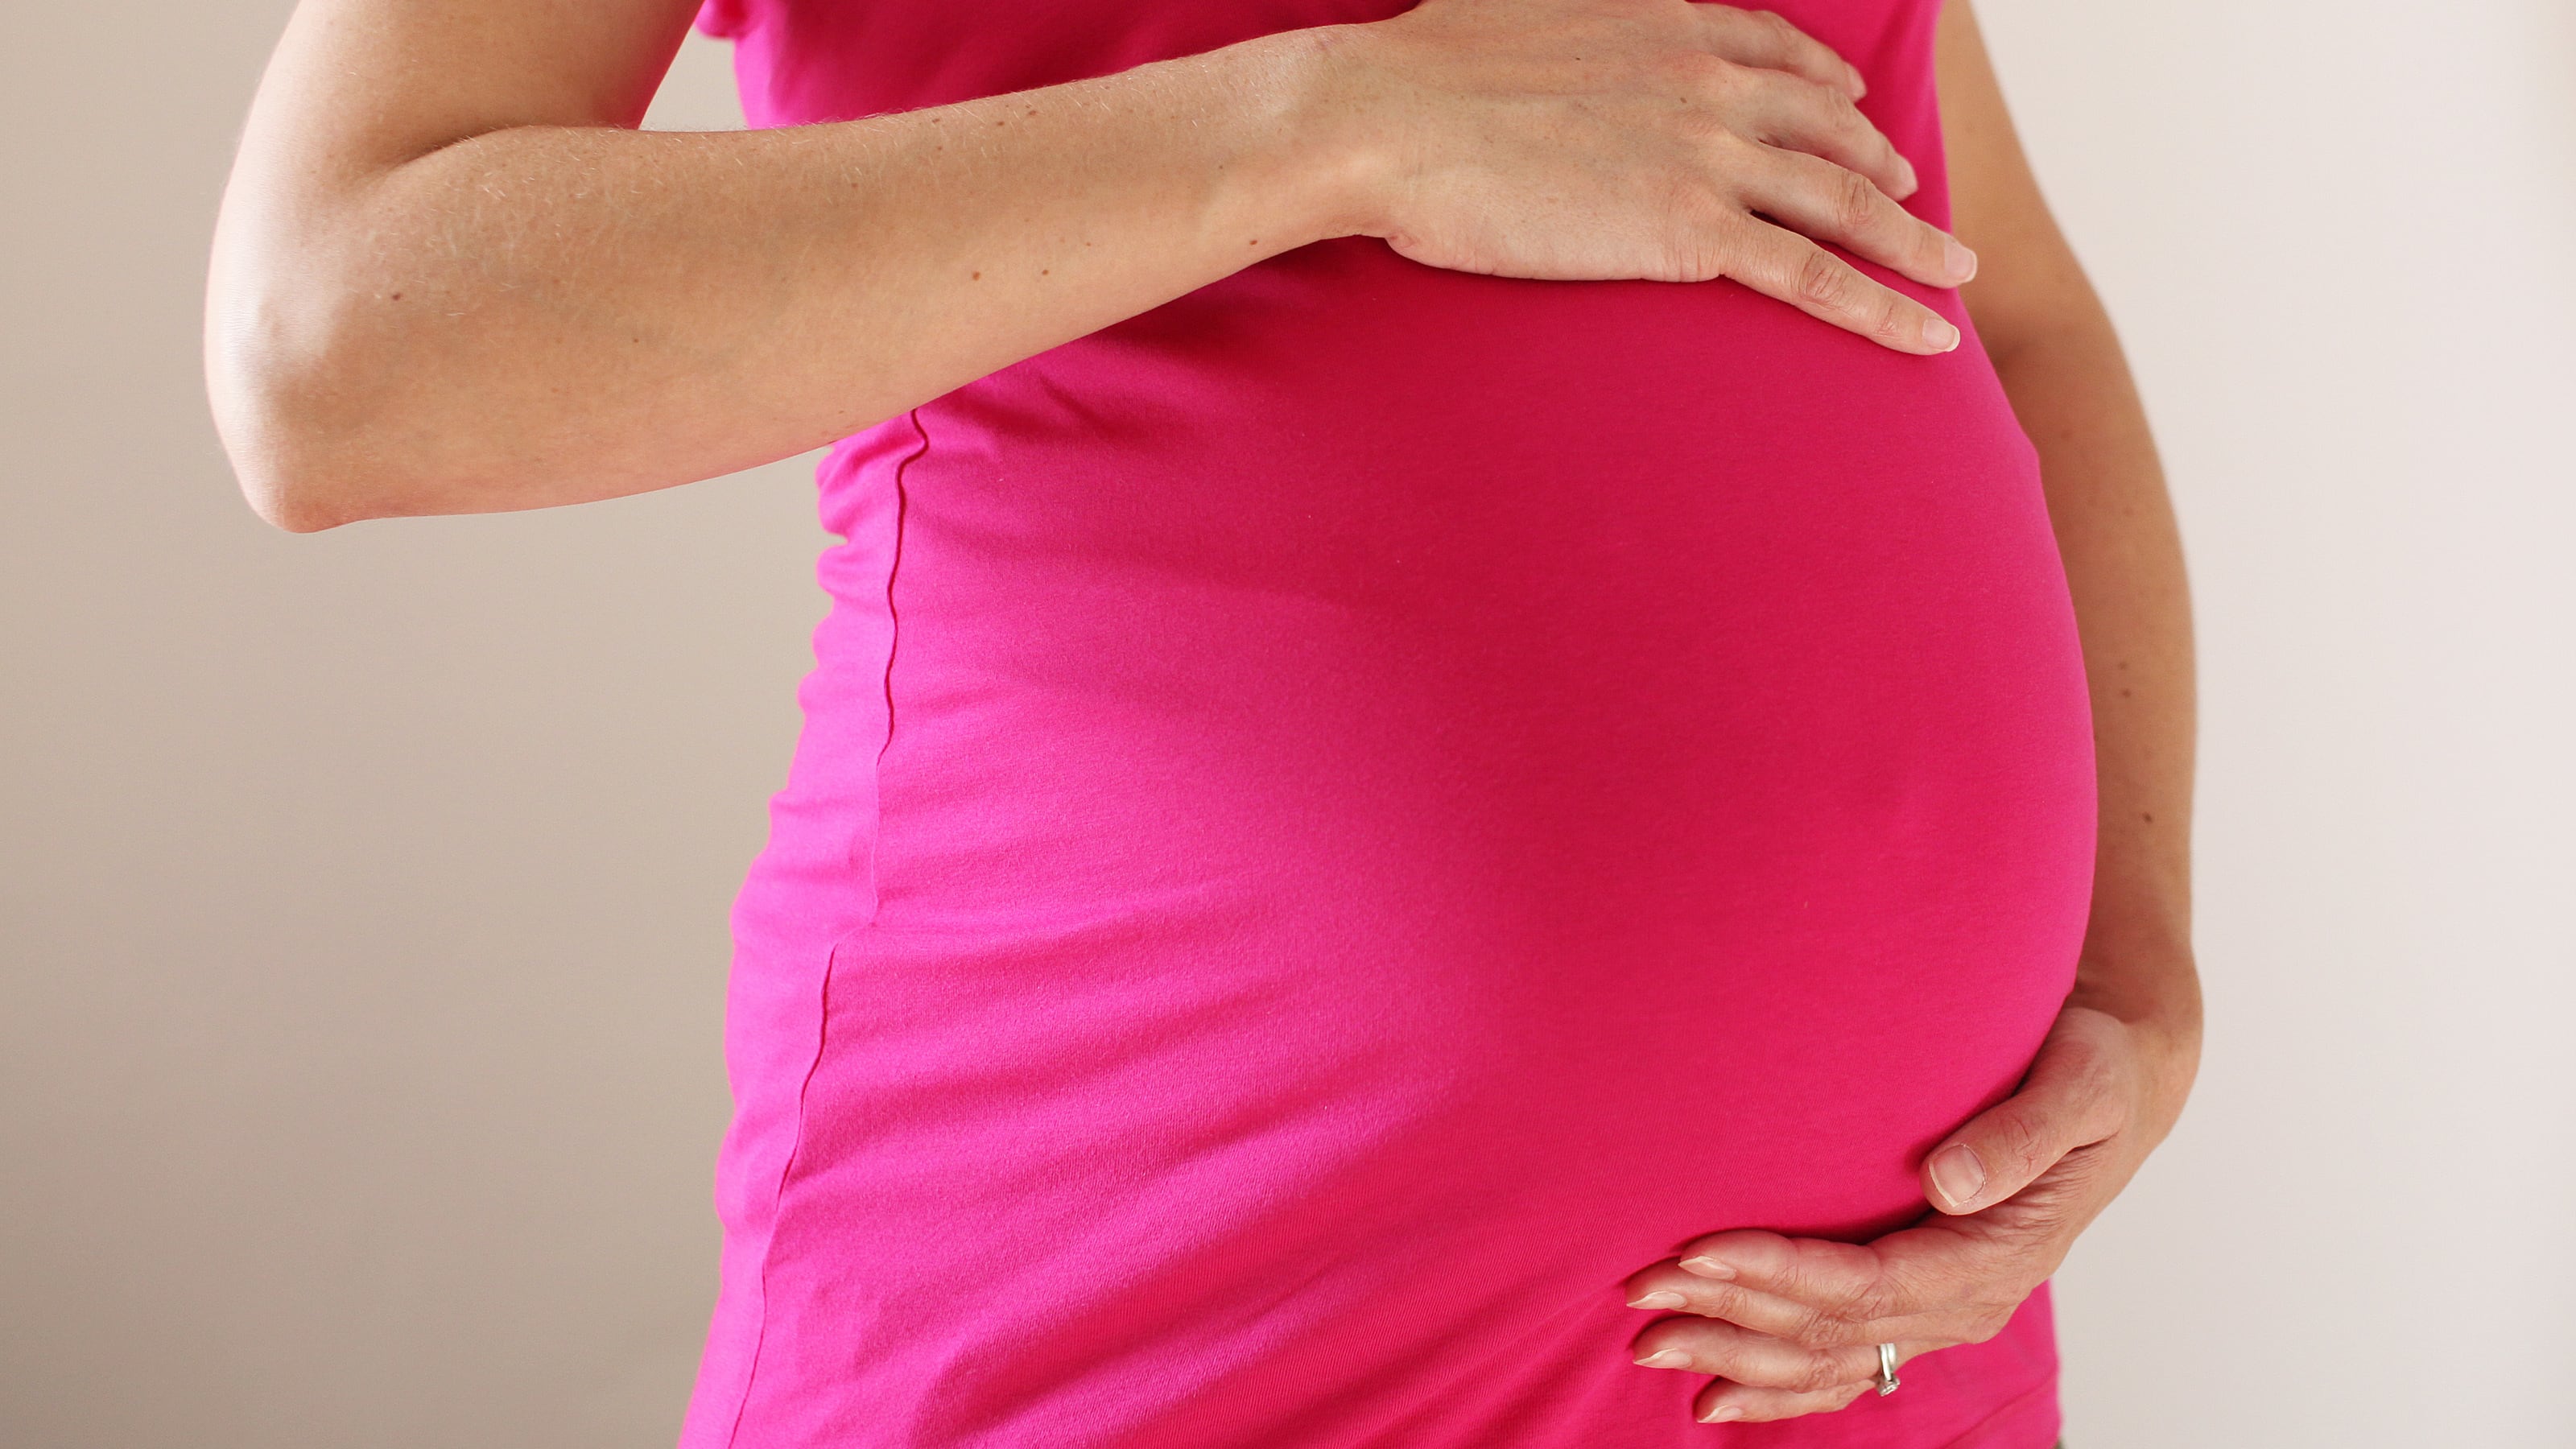 Concerns have been raised over maternity care at hospitals in Bedfordshire